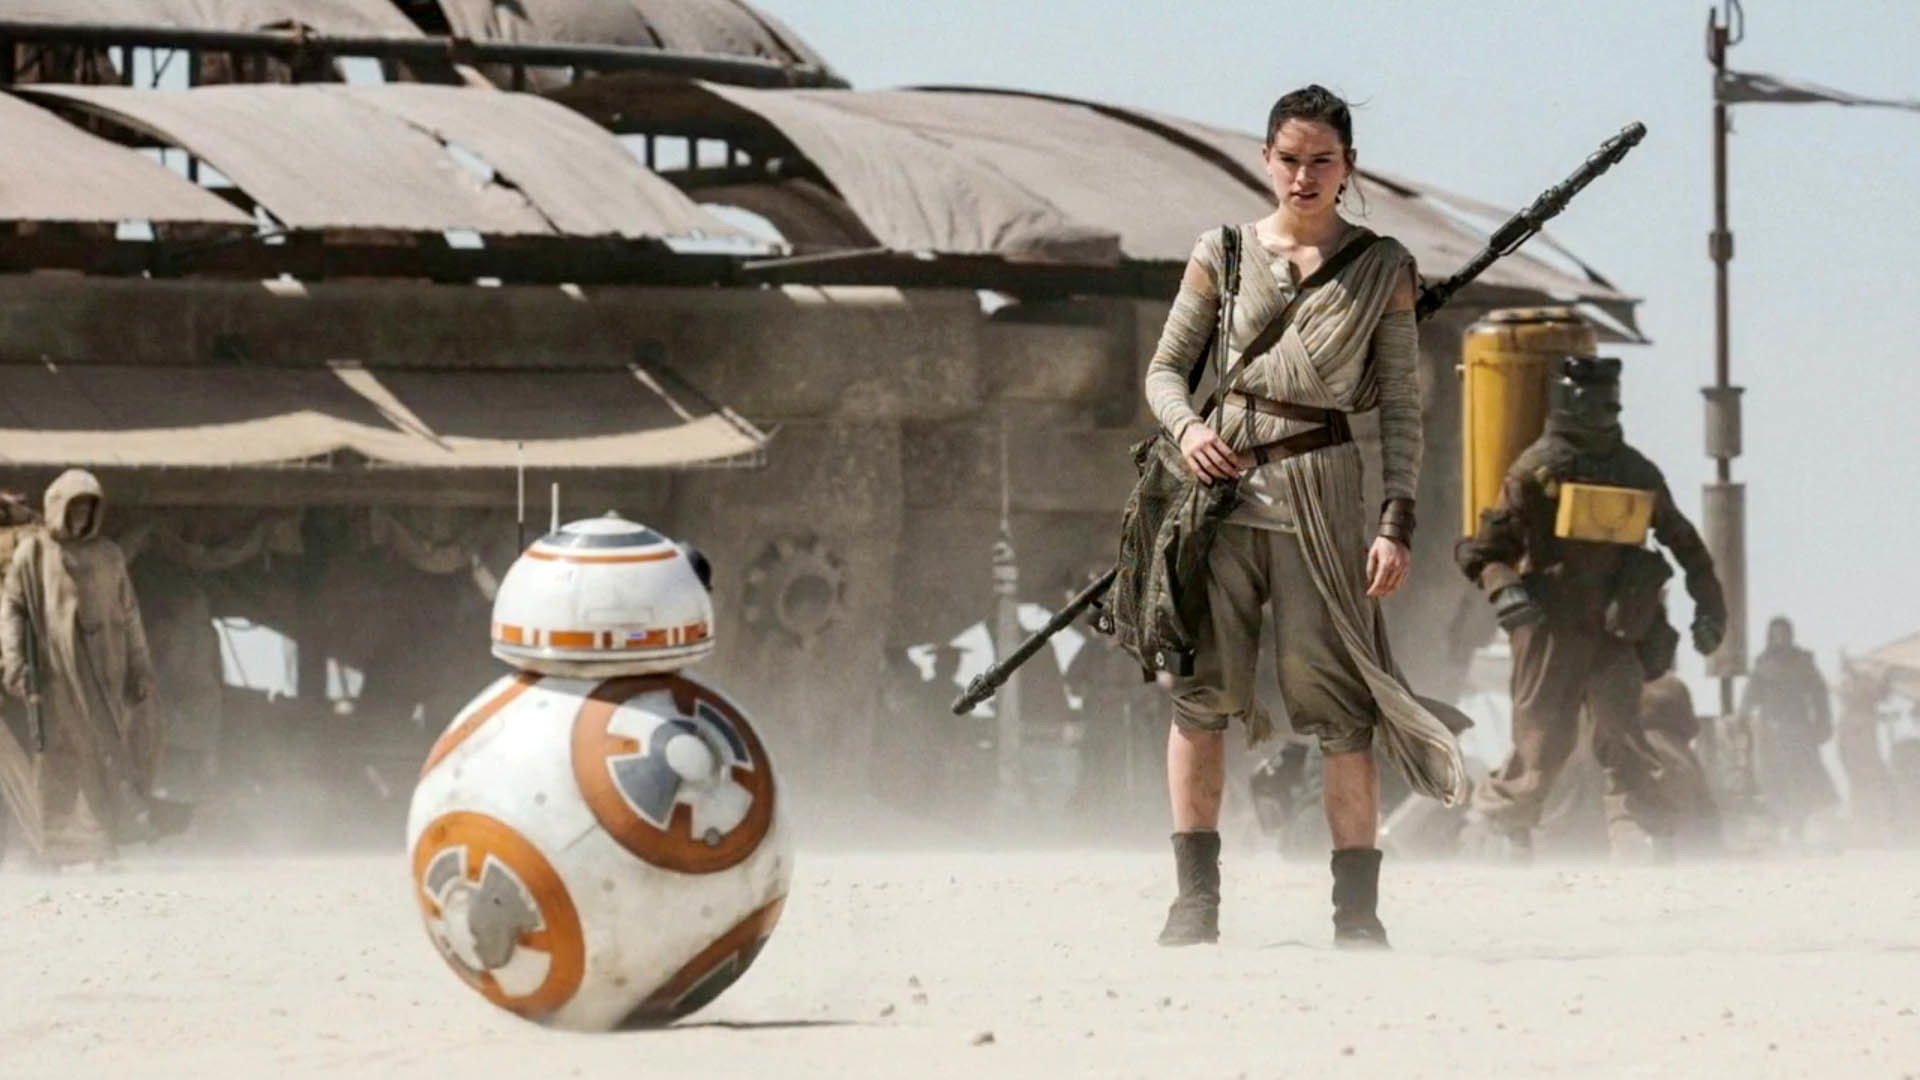 BB 8 and Rey – Star Wars 7 The Force Awakens wallpaper